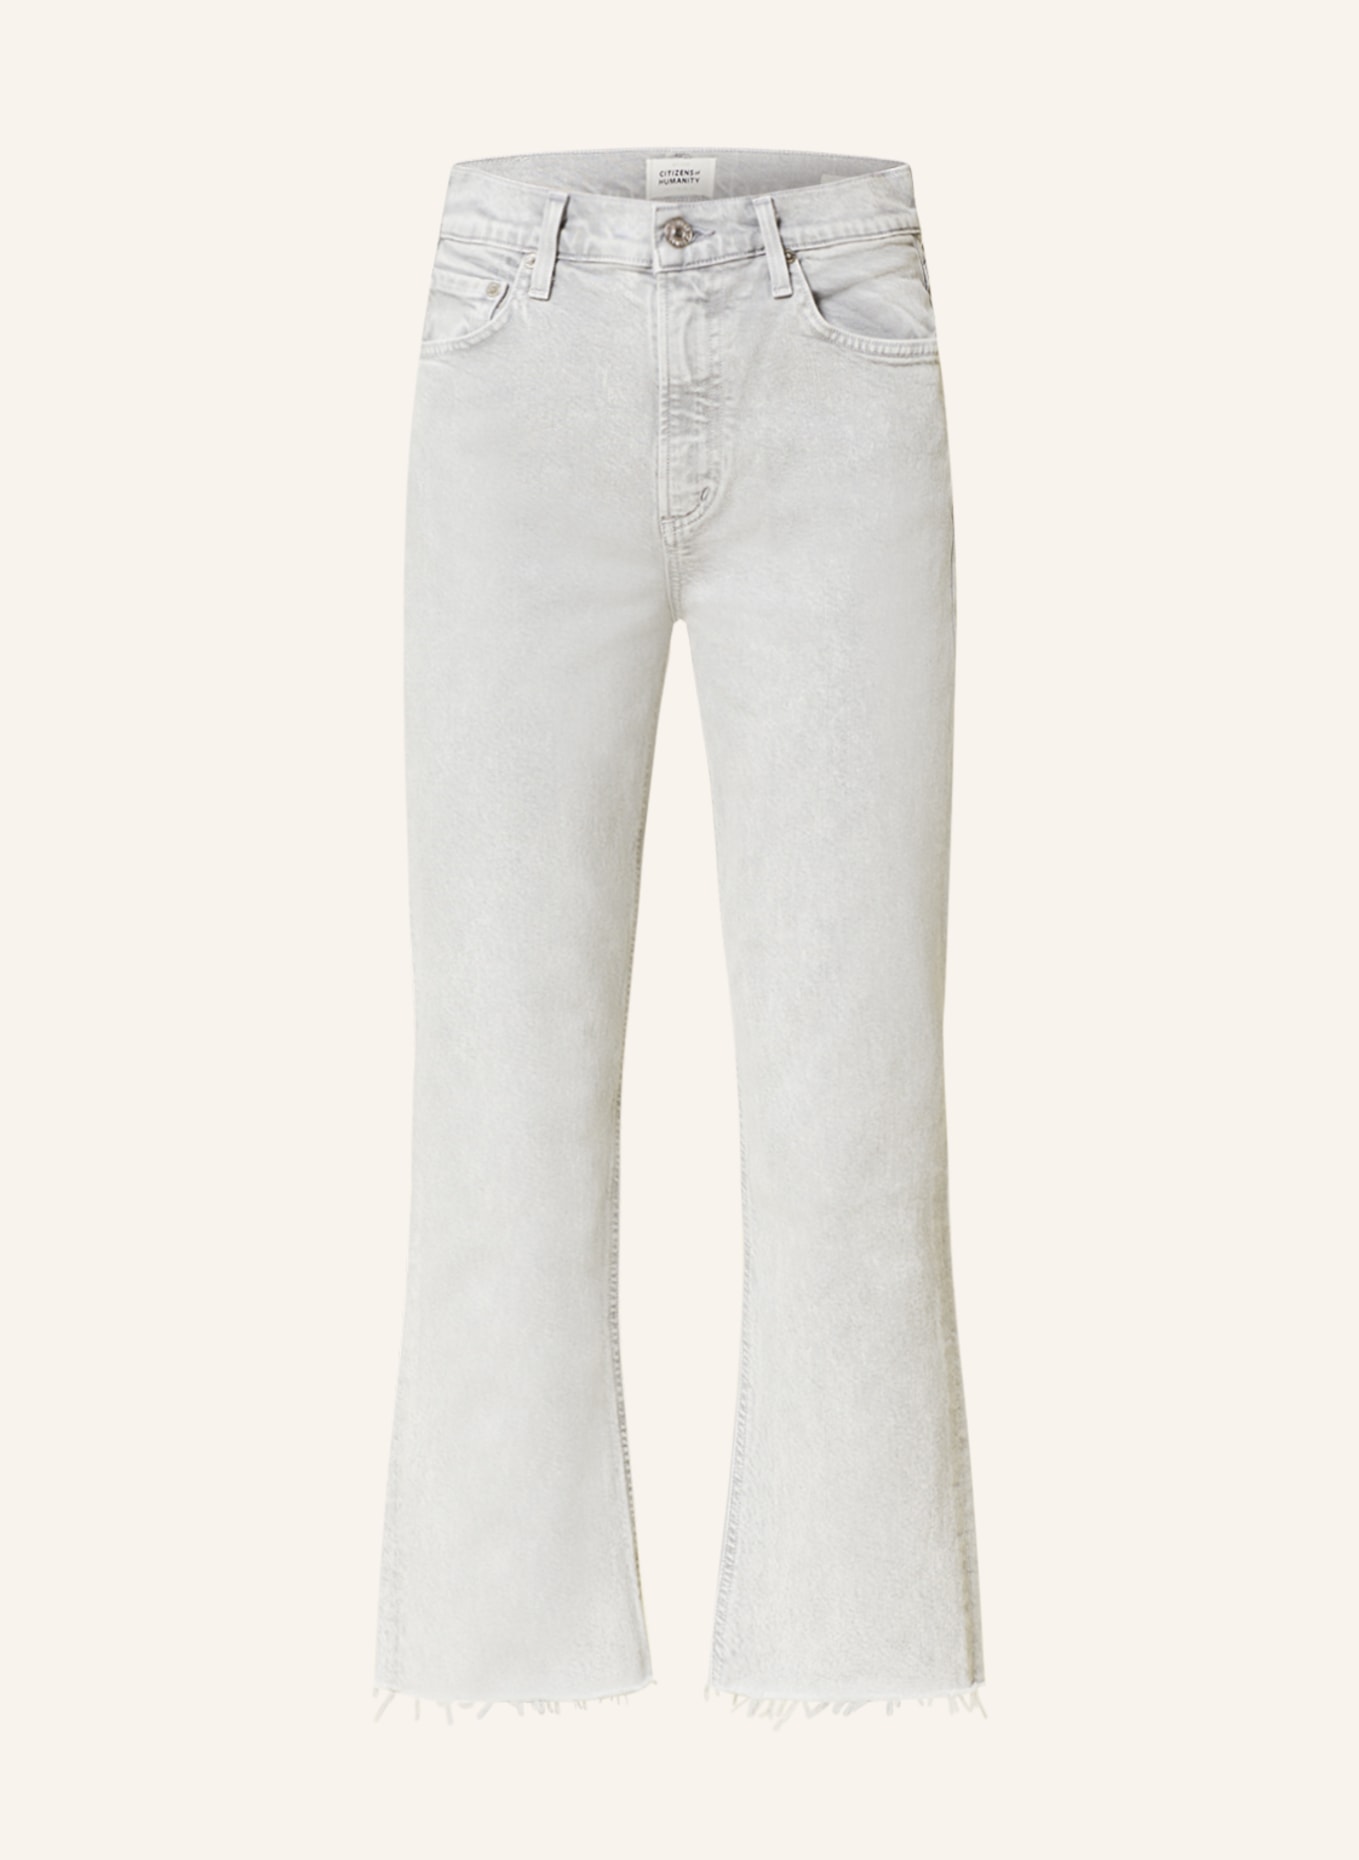 CITIZENS of HUMANITY 7/8-Jeans ISOLA, Farbe: ABBEY LIGHT GREY (Bild 1)